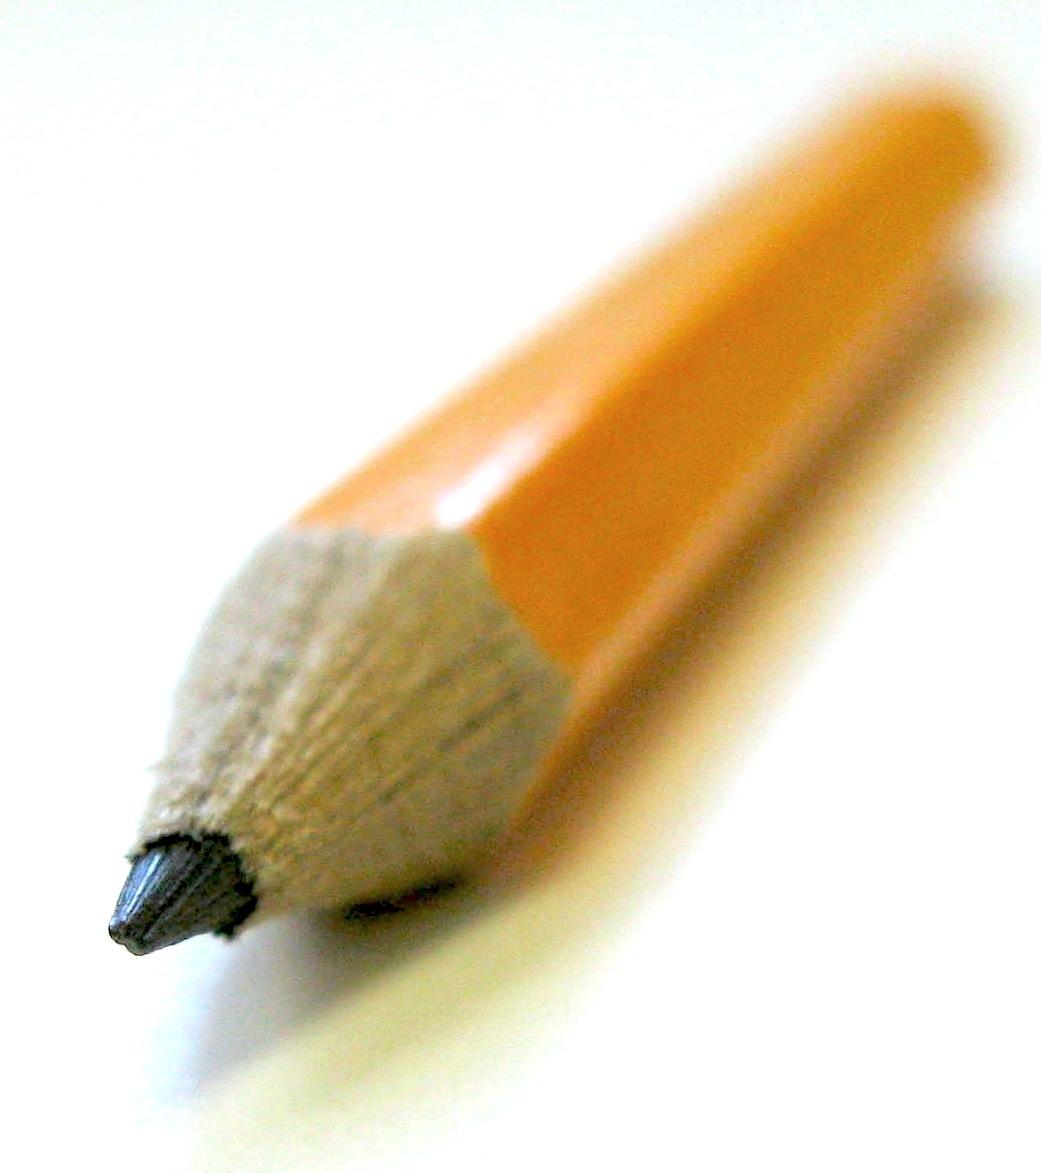 zoomed in view of a sharpened pencil focusing on the graphite pencil tip